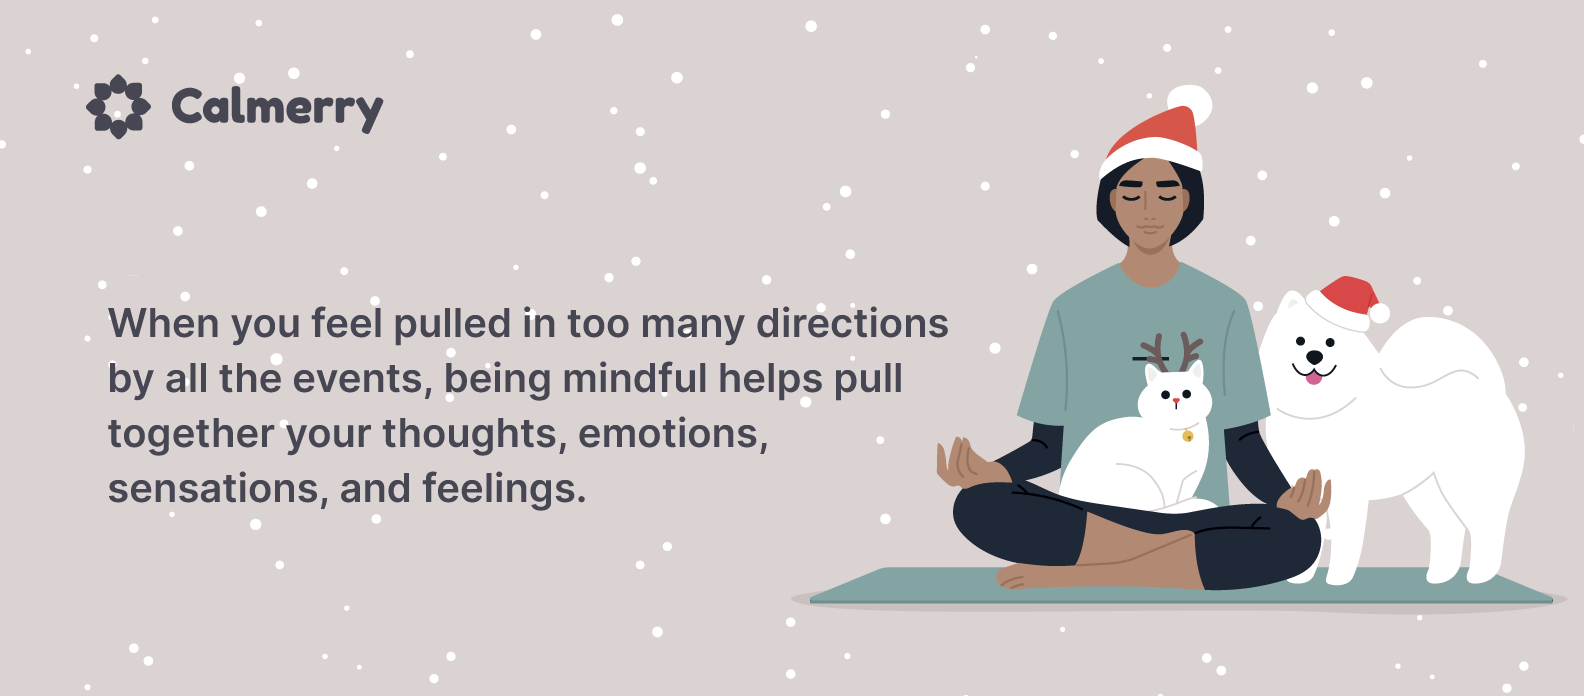 Being mindful helps pull together your thoughts, emotions, sensations, and feelings.